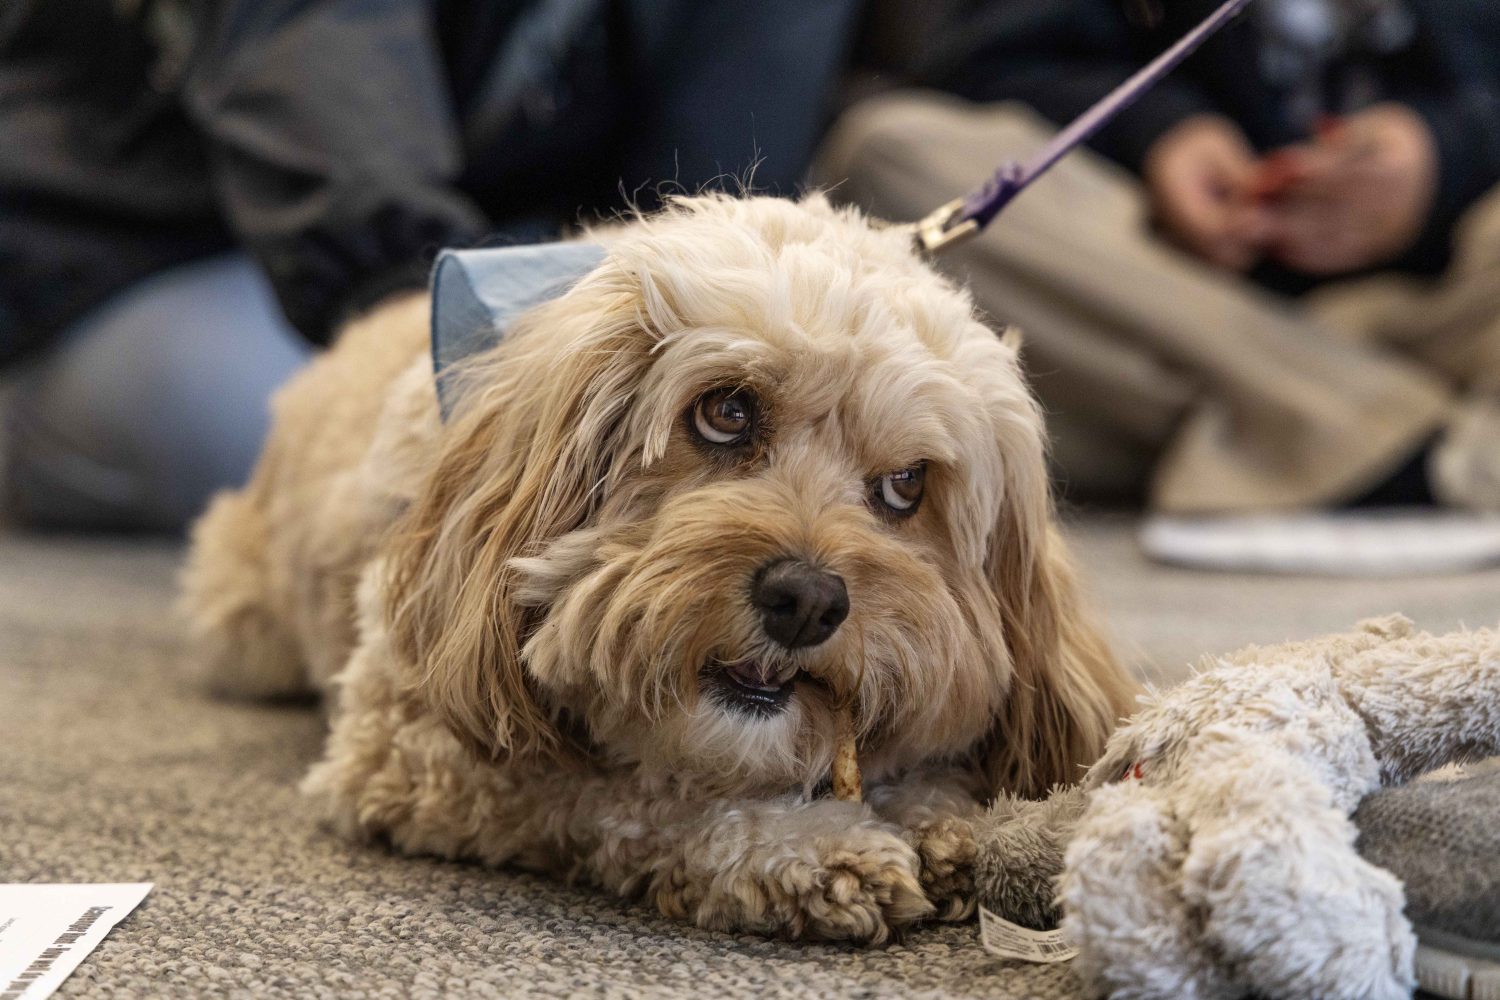 Bea gnaws on a treat during the PAWS 10th anniversary at Wilson Library on Thursday, Nov. 16, 2023. Bea double majors in playology and snugglolgy, and enjoys car rides. (Photo/Adria Carpenter)